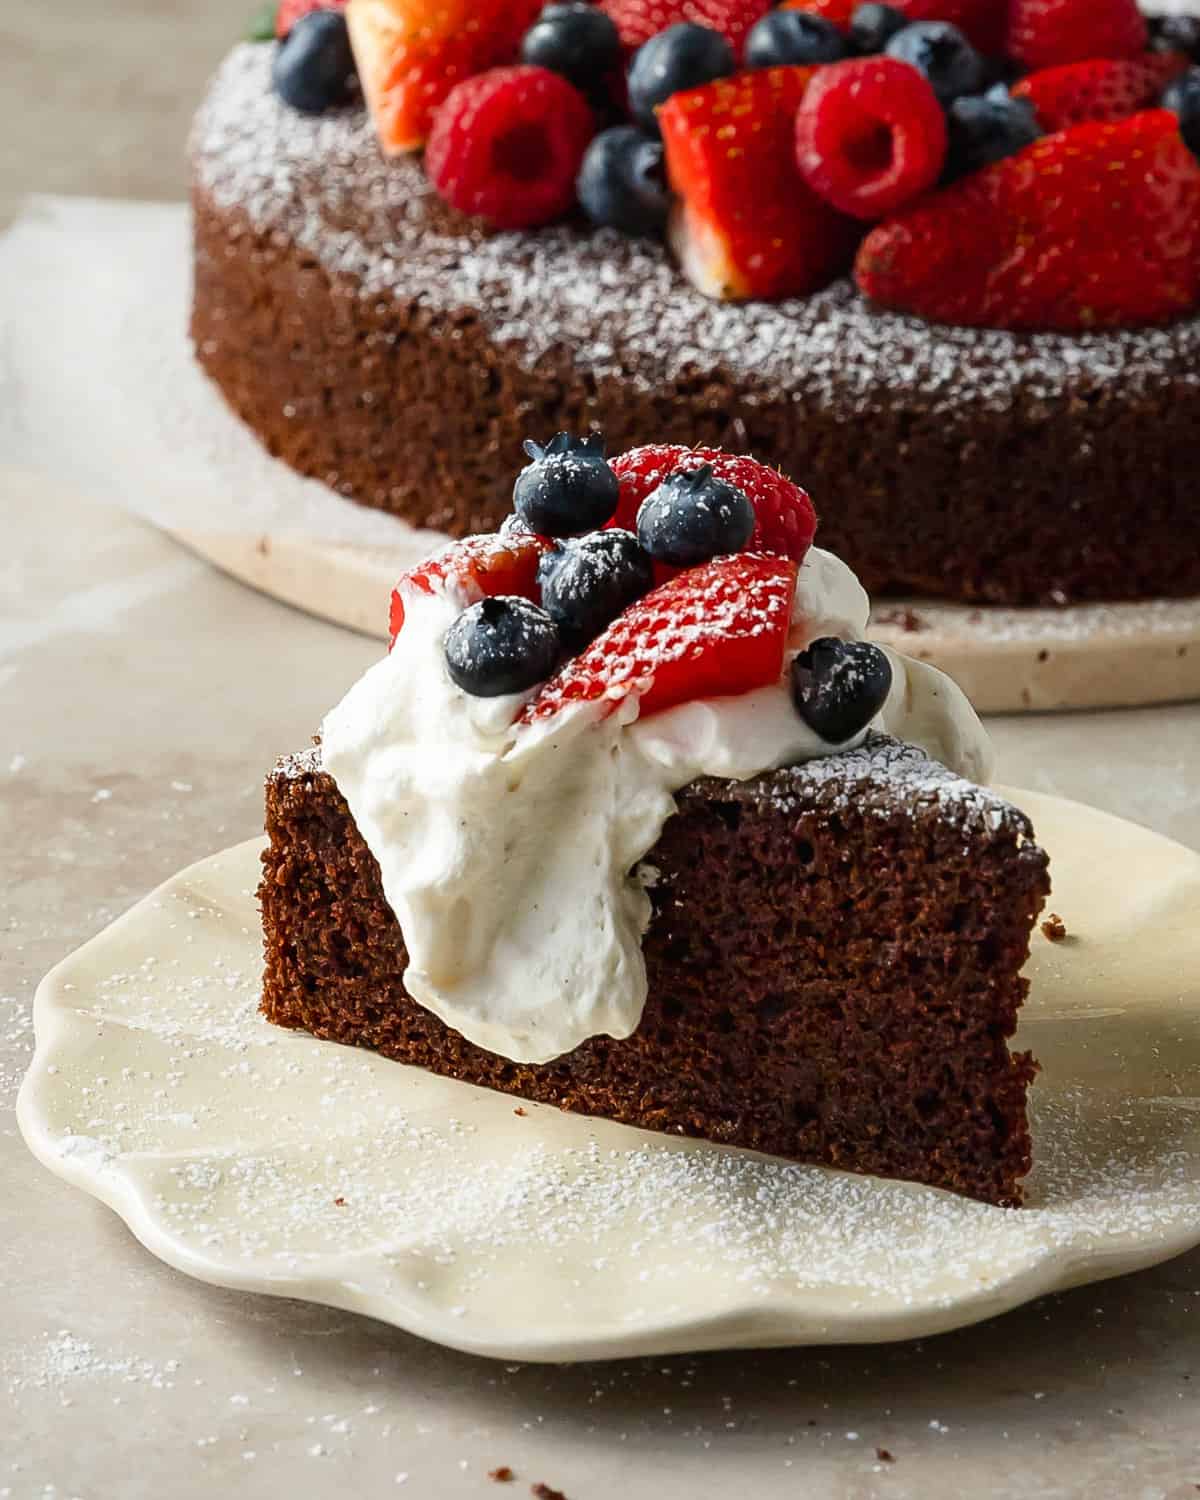 Chocolate olive oil cake is a deeply moist and tender chocolate cake made with rich and earthy olive oil. Top this simple olive oil chocolate cake with berries and fresh whipped cream for the perfect easy to make dessert. 